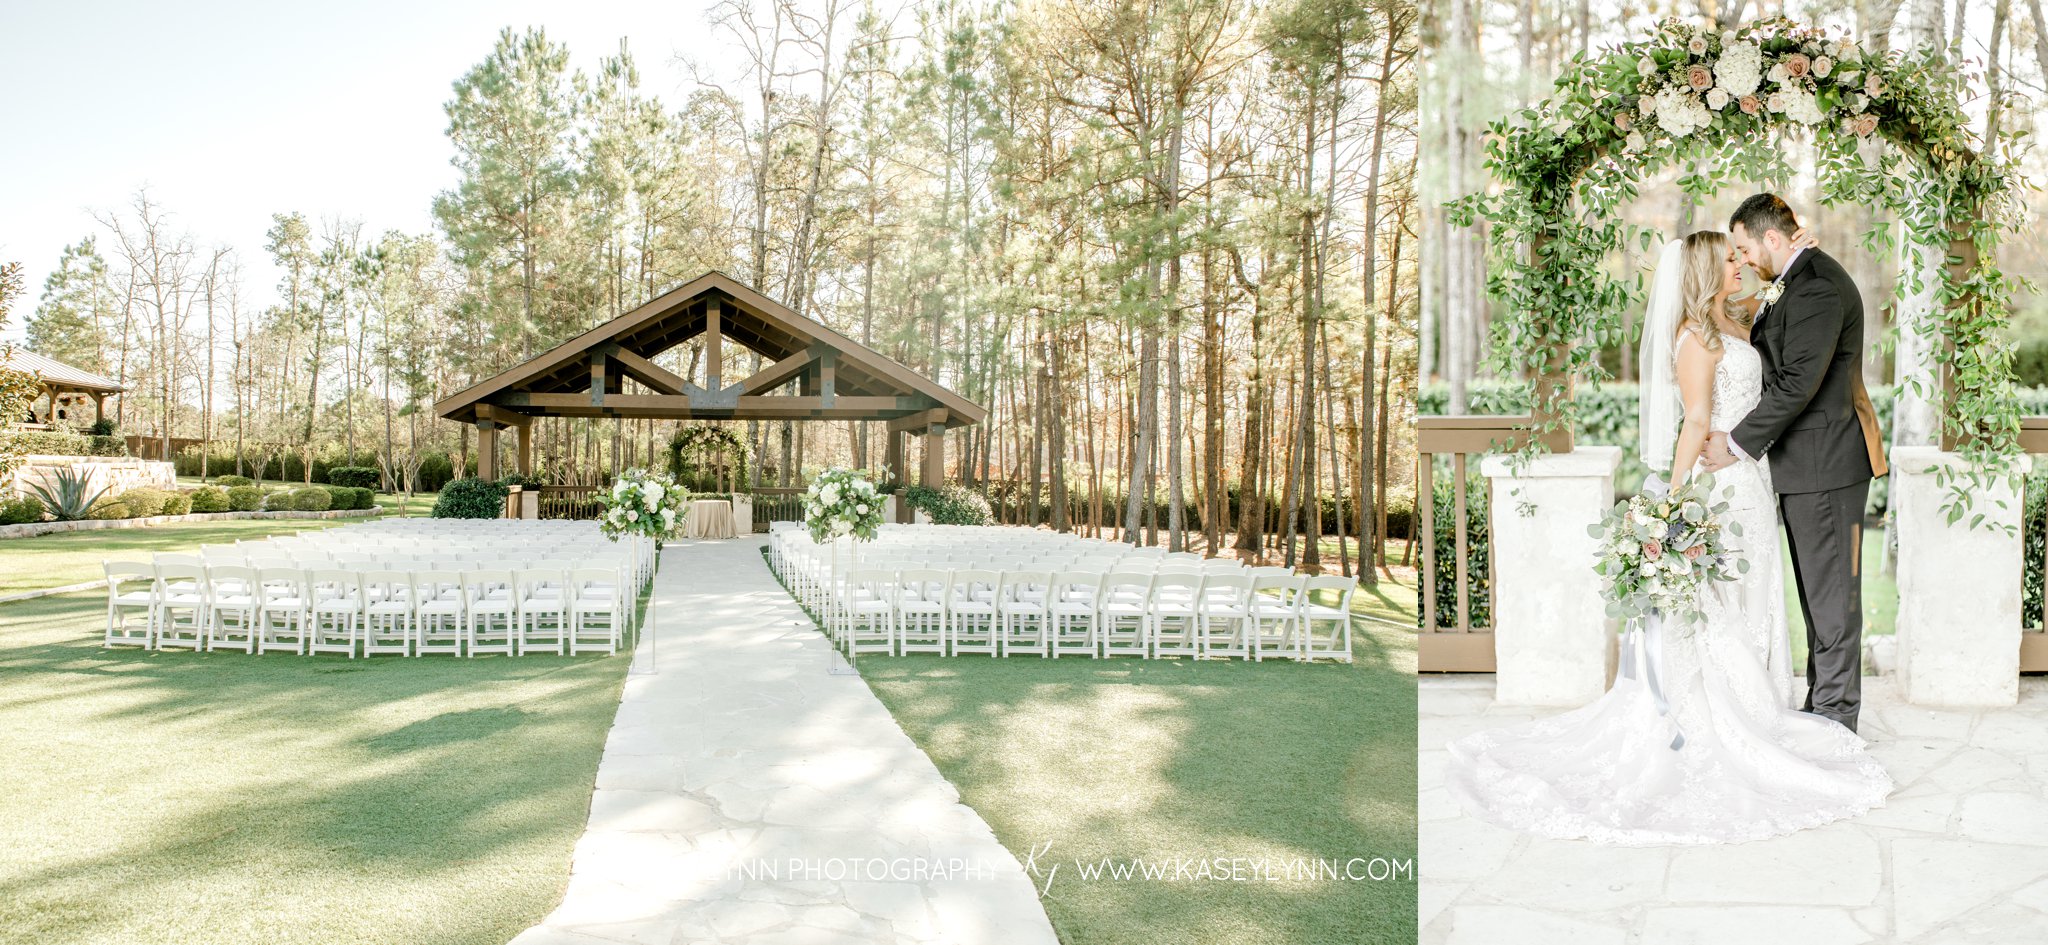 The Springs Events / Kasey Lynn Photography